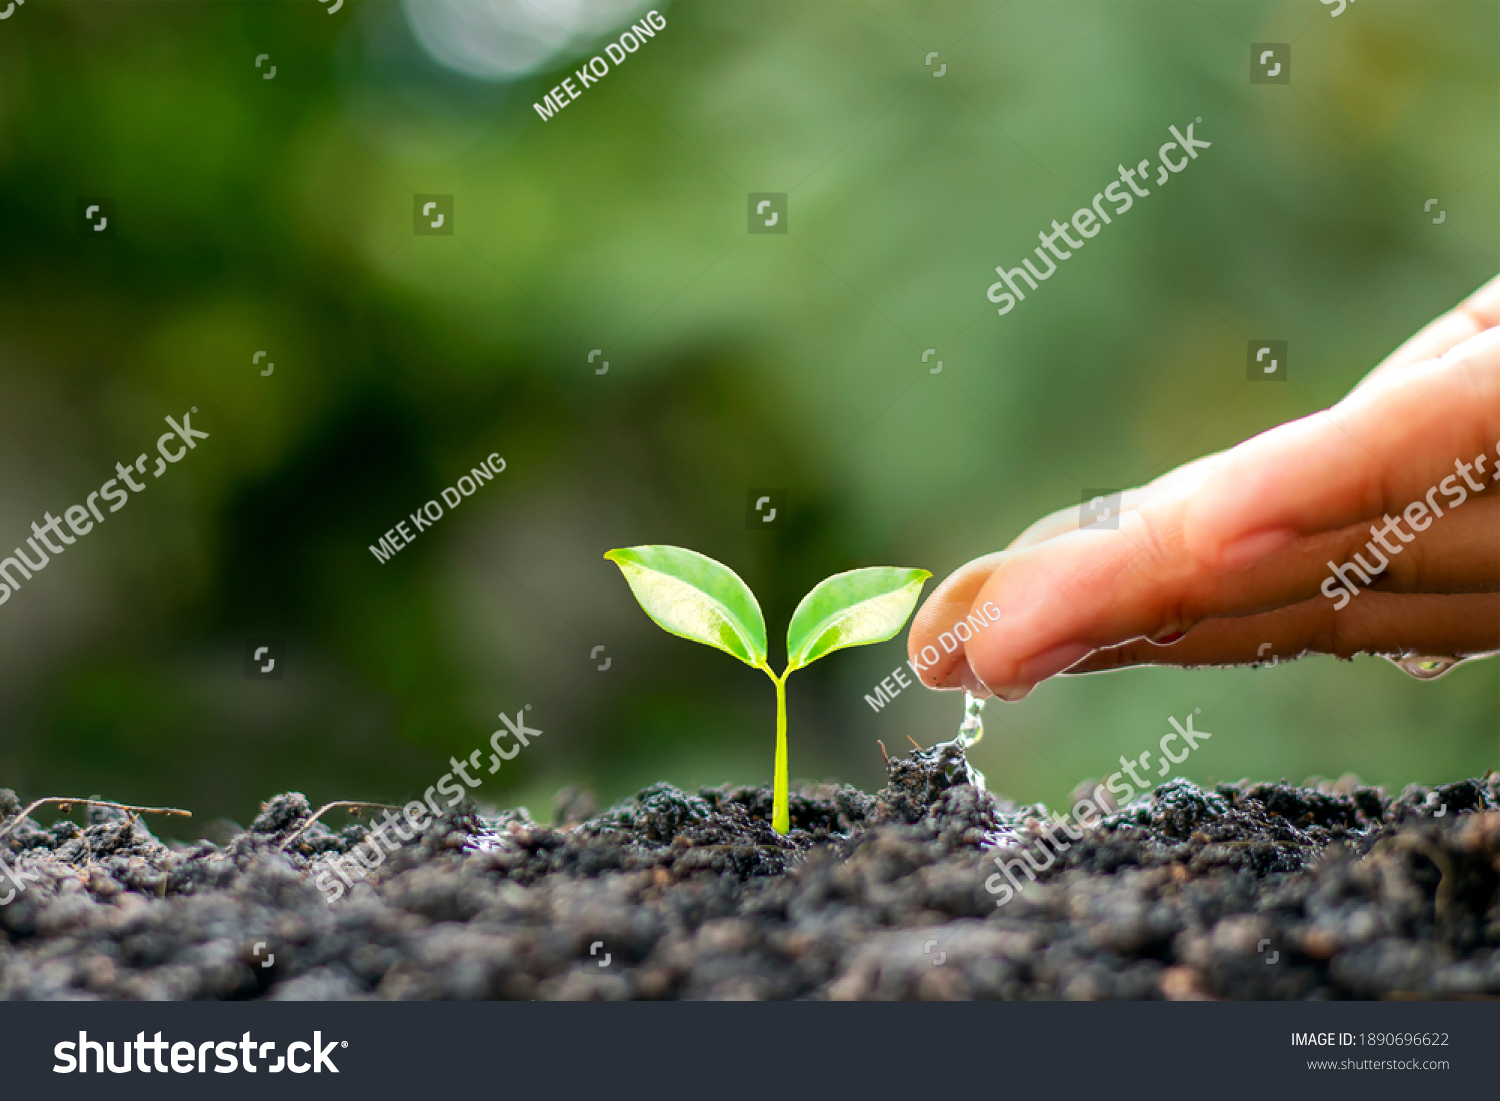 Farmers are watering small plants by hand with the concept of World Environment Day. #1890696622